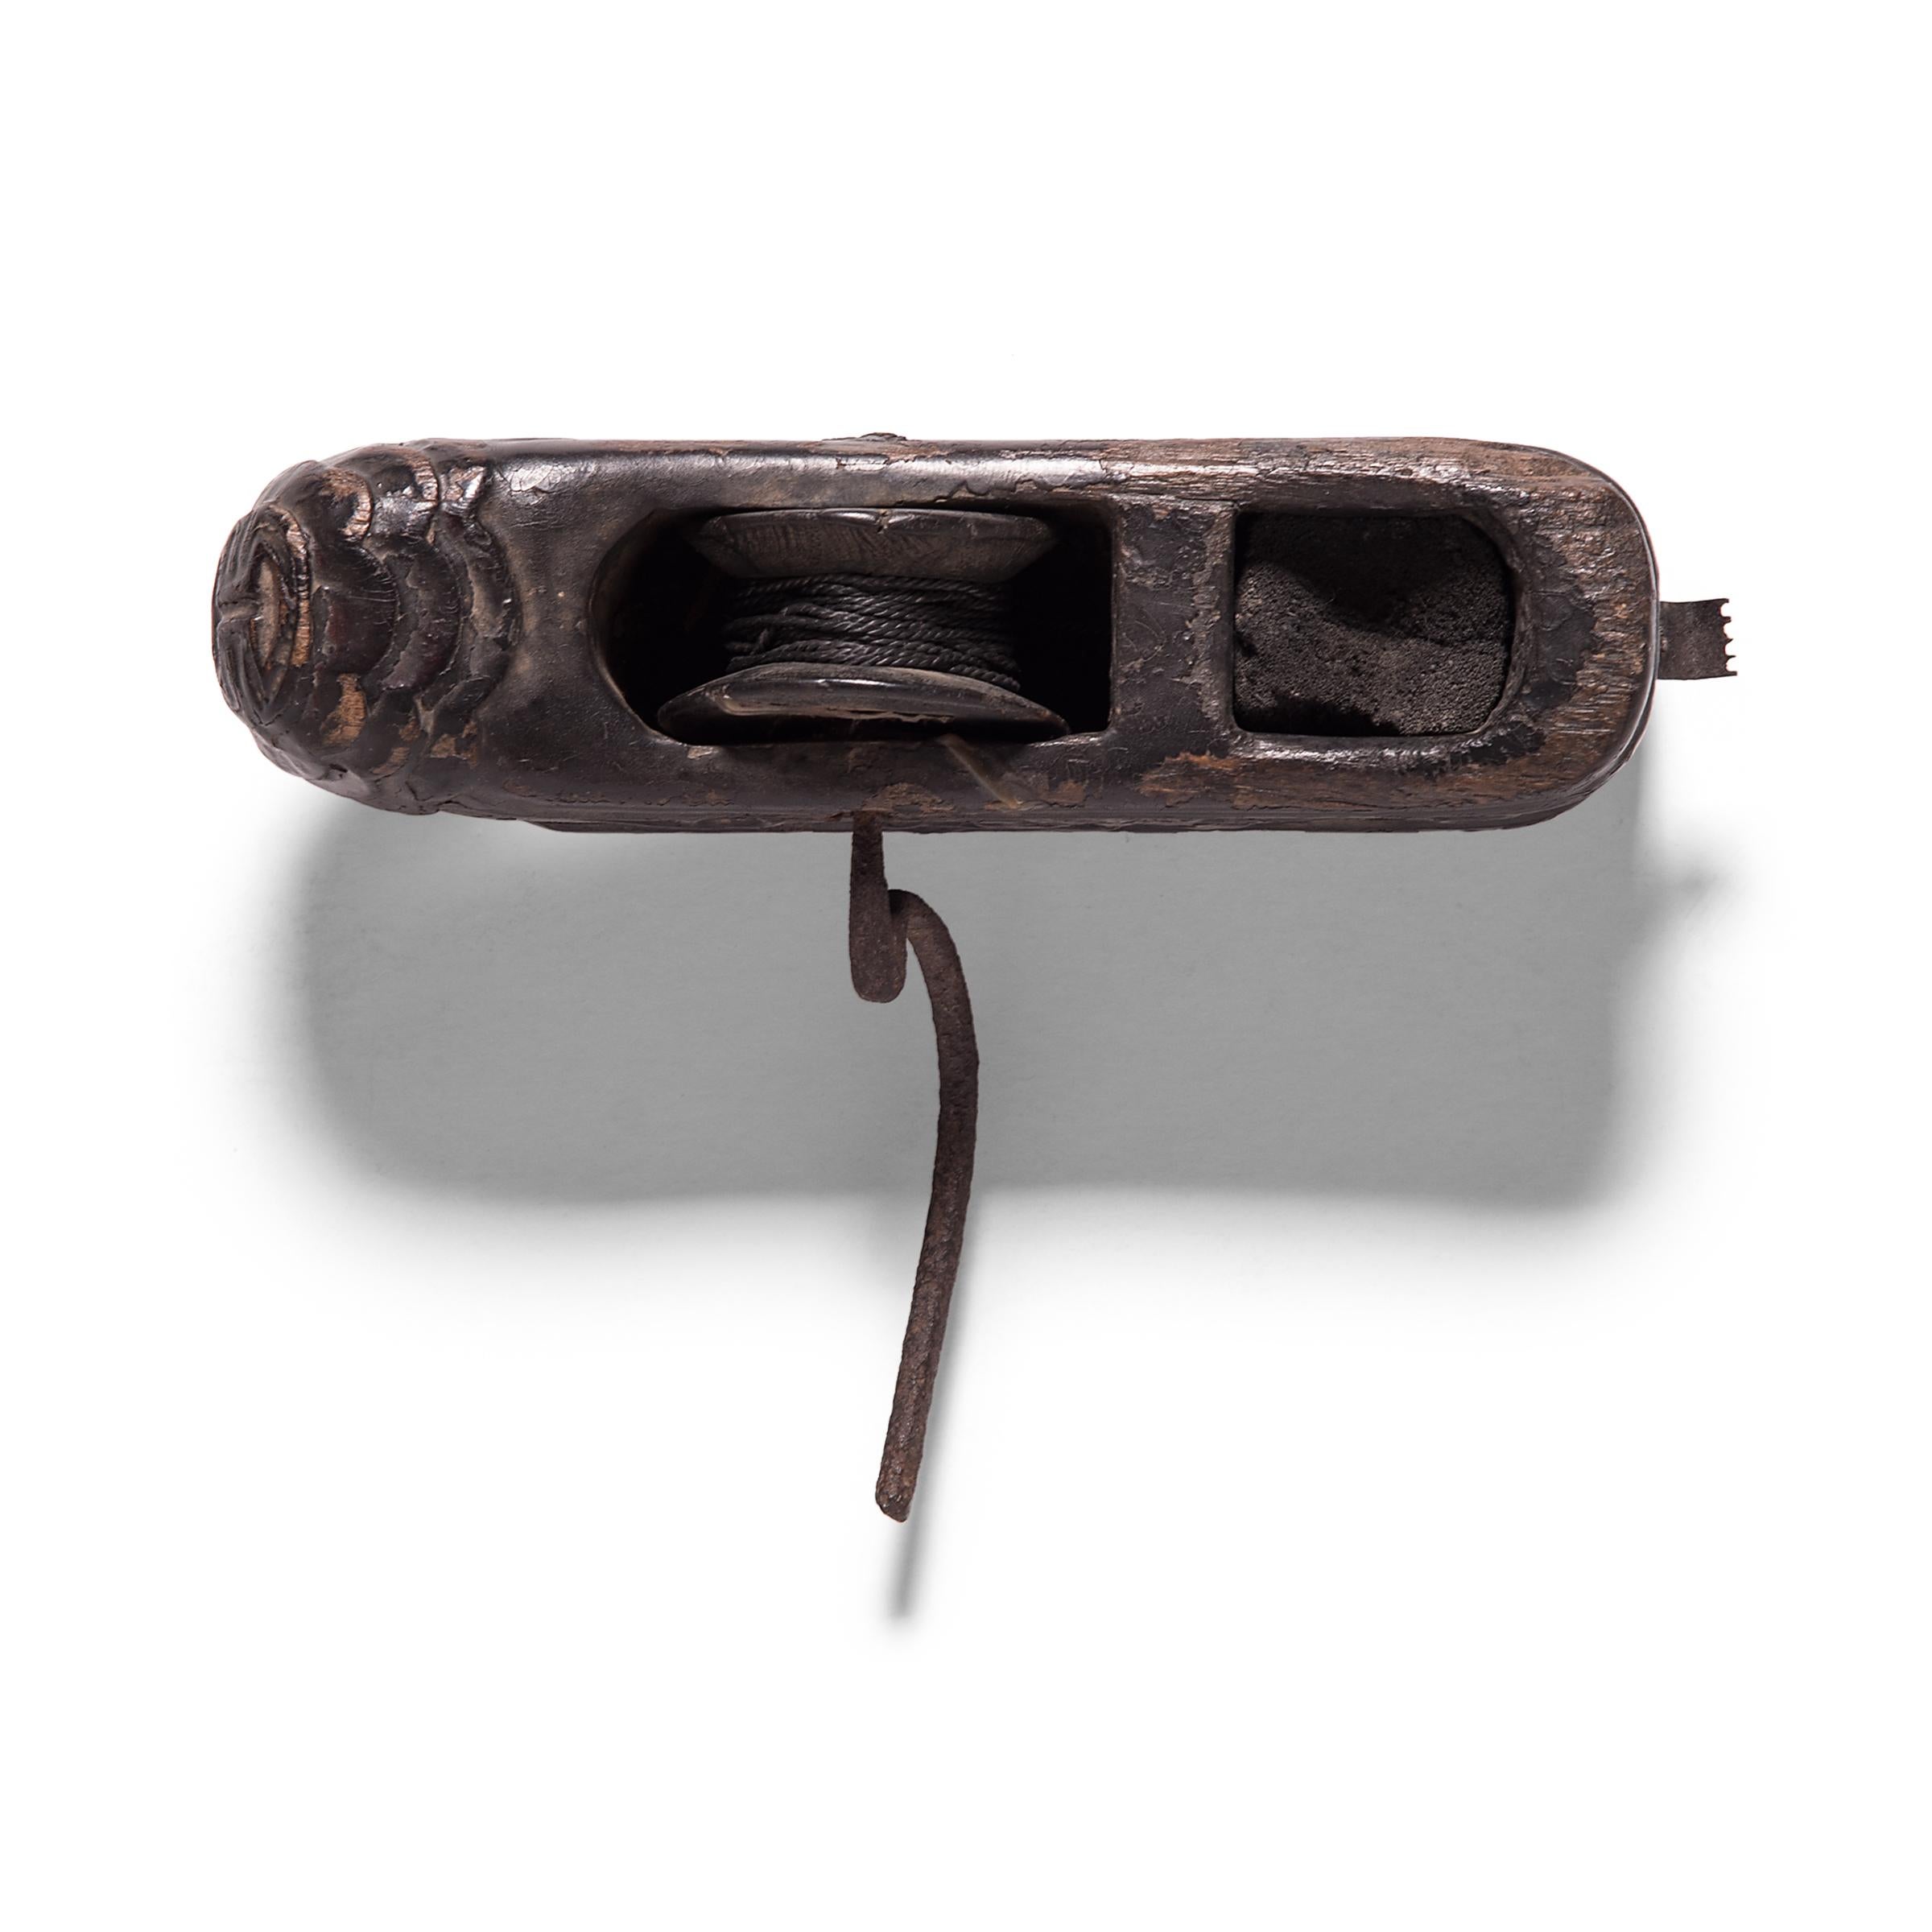 Lacquered Chinese Shou Shoe Carpenter Line, c. 1850 For Sale